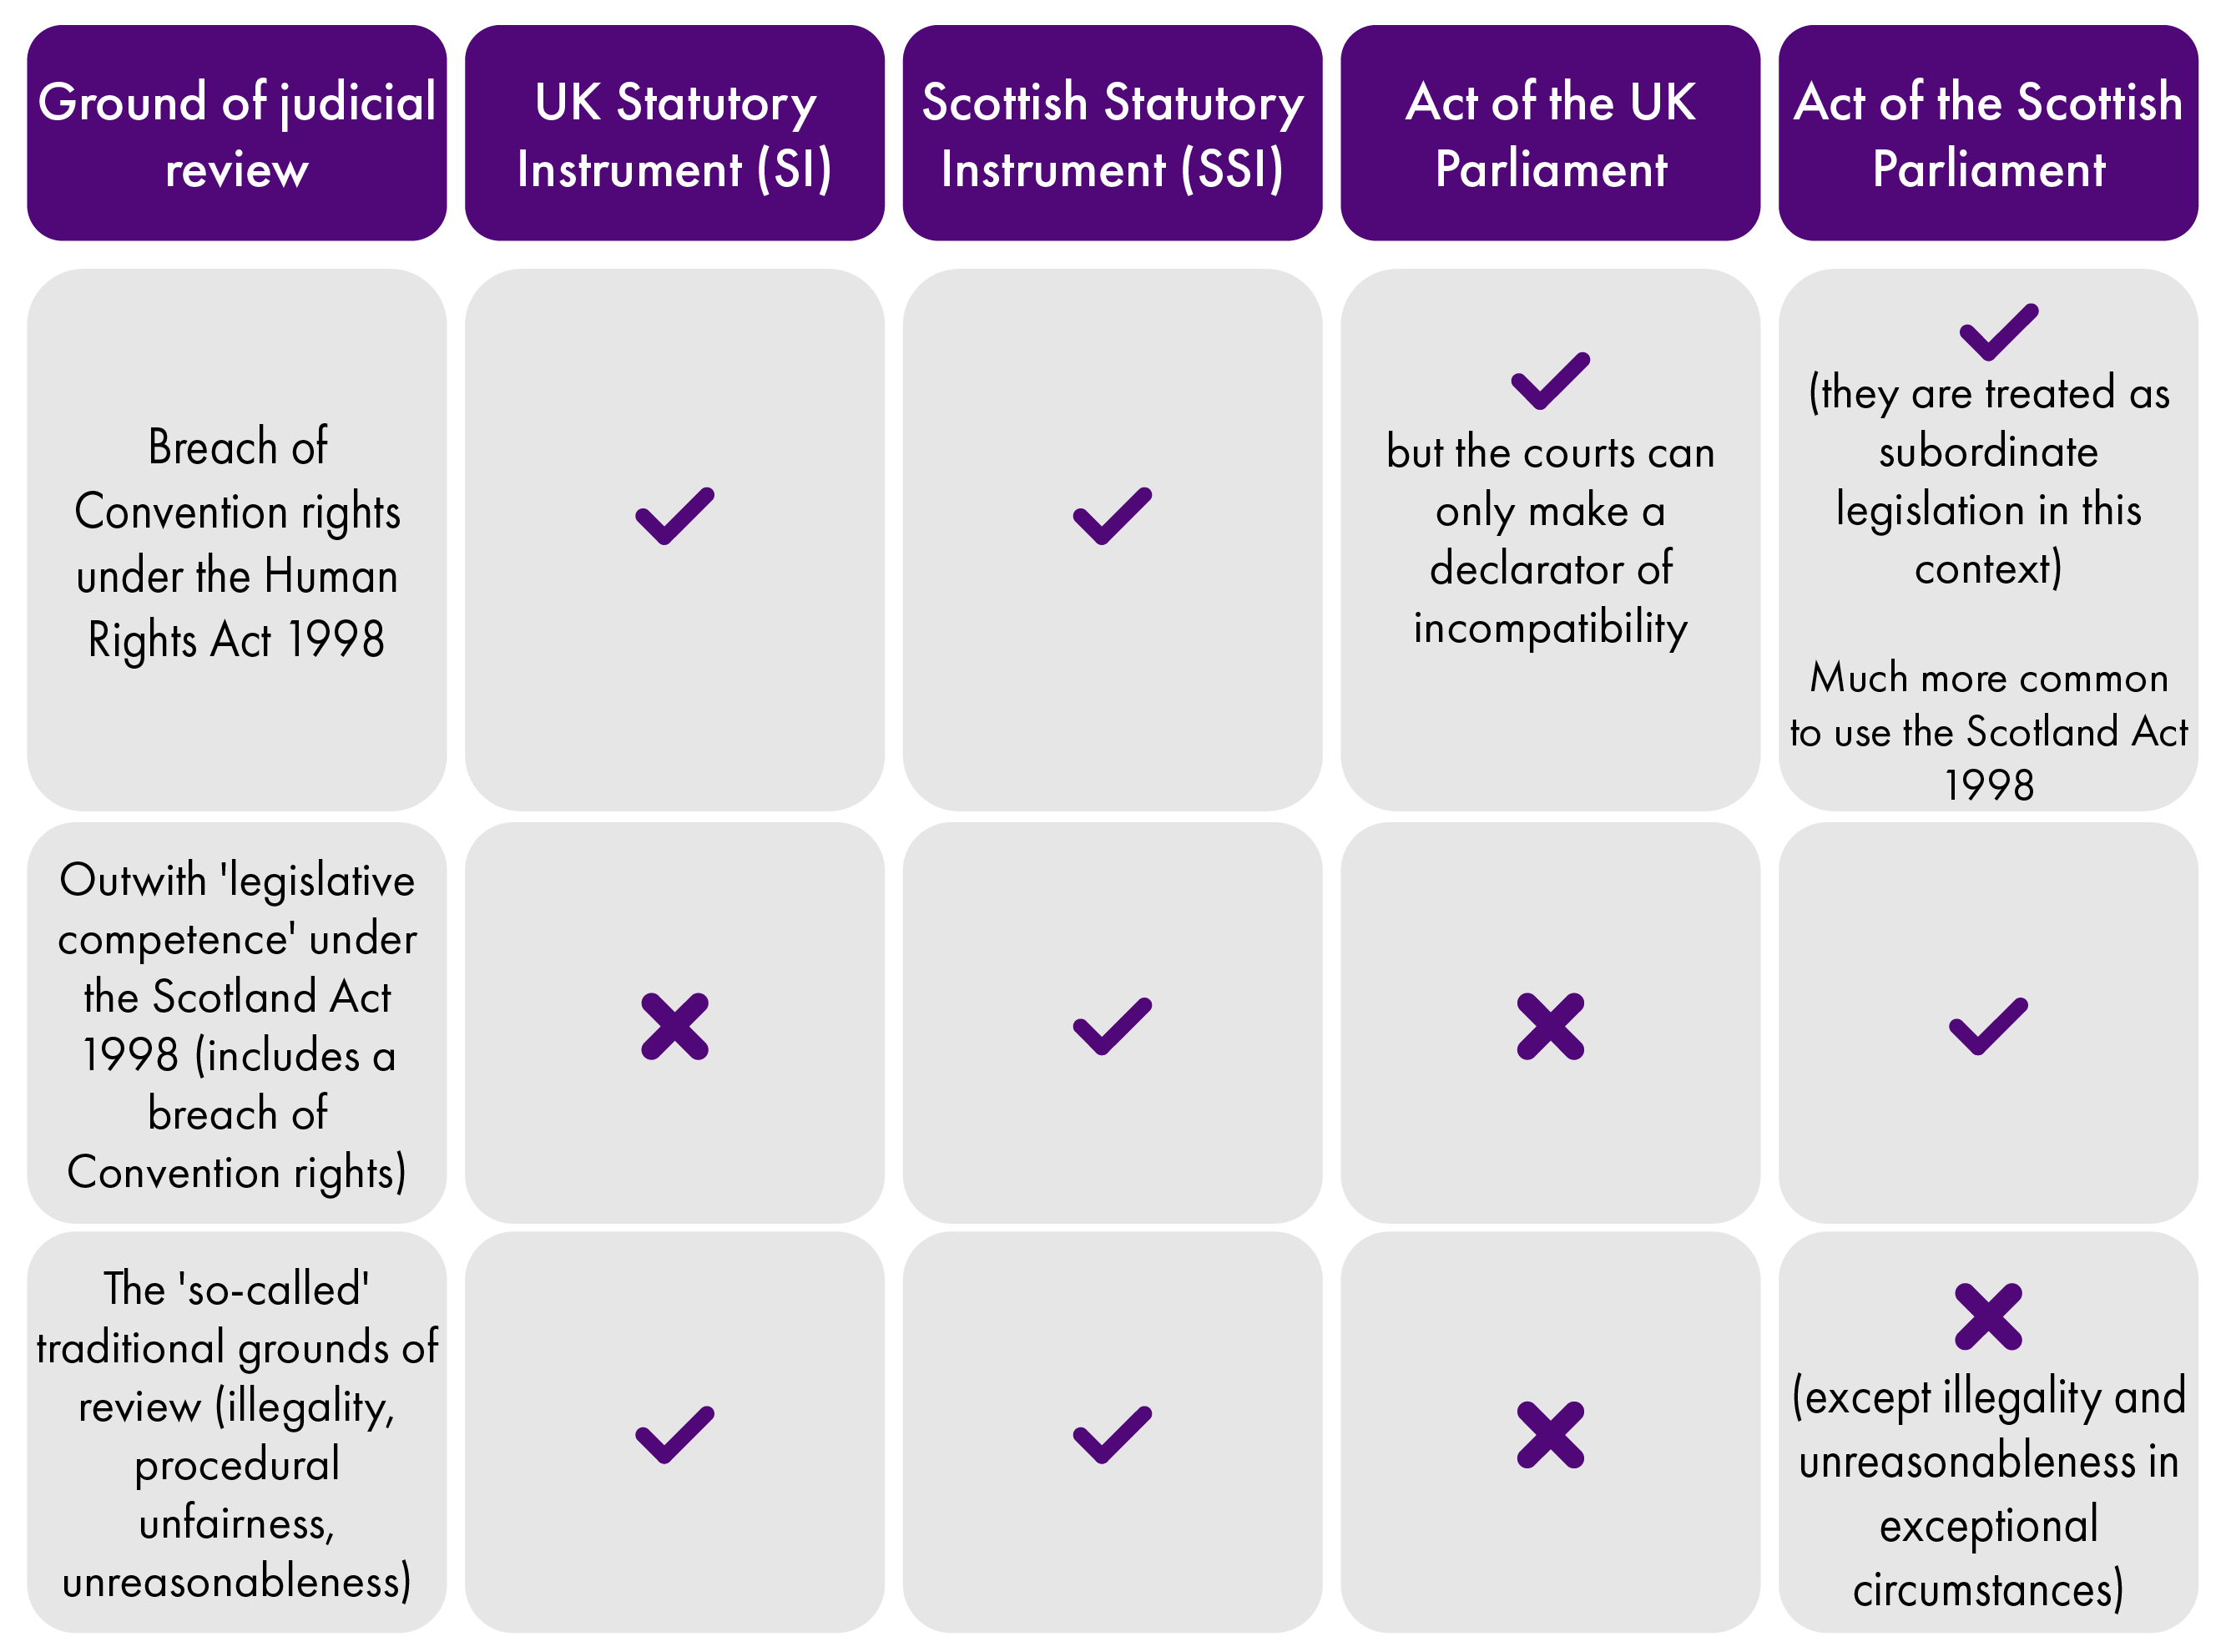 This is an infographic showing the scope for a judicial review challenge to EU-derived domestic legislation according to the different grounds of review and the type of legislation at issue (for example, primary or subordinate legislation; Scottish or UK legislation). An alleged breach of Convention rights under the Human Rights Act 1998 is the only ground of review possible in respect of all types of EU-derived domestic legislation.